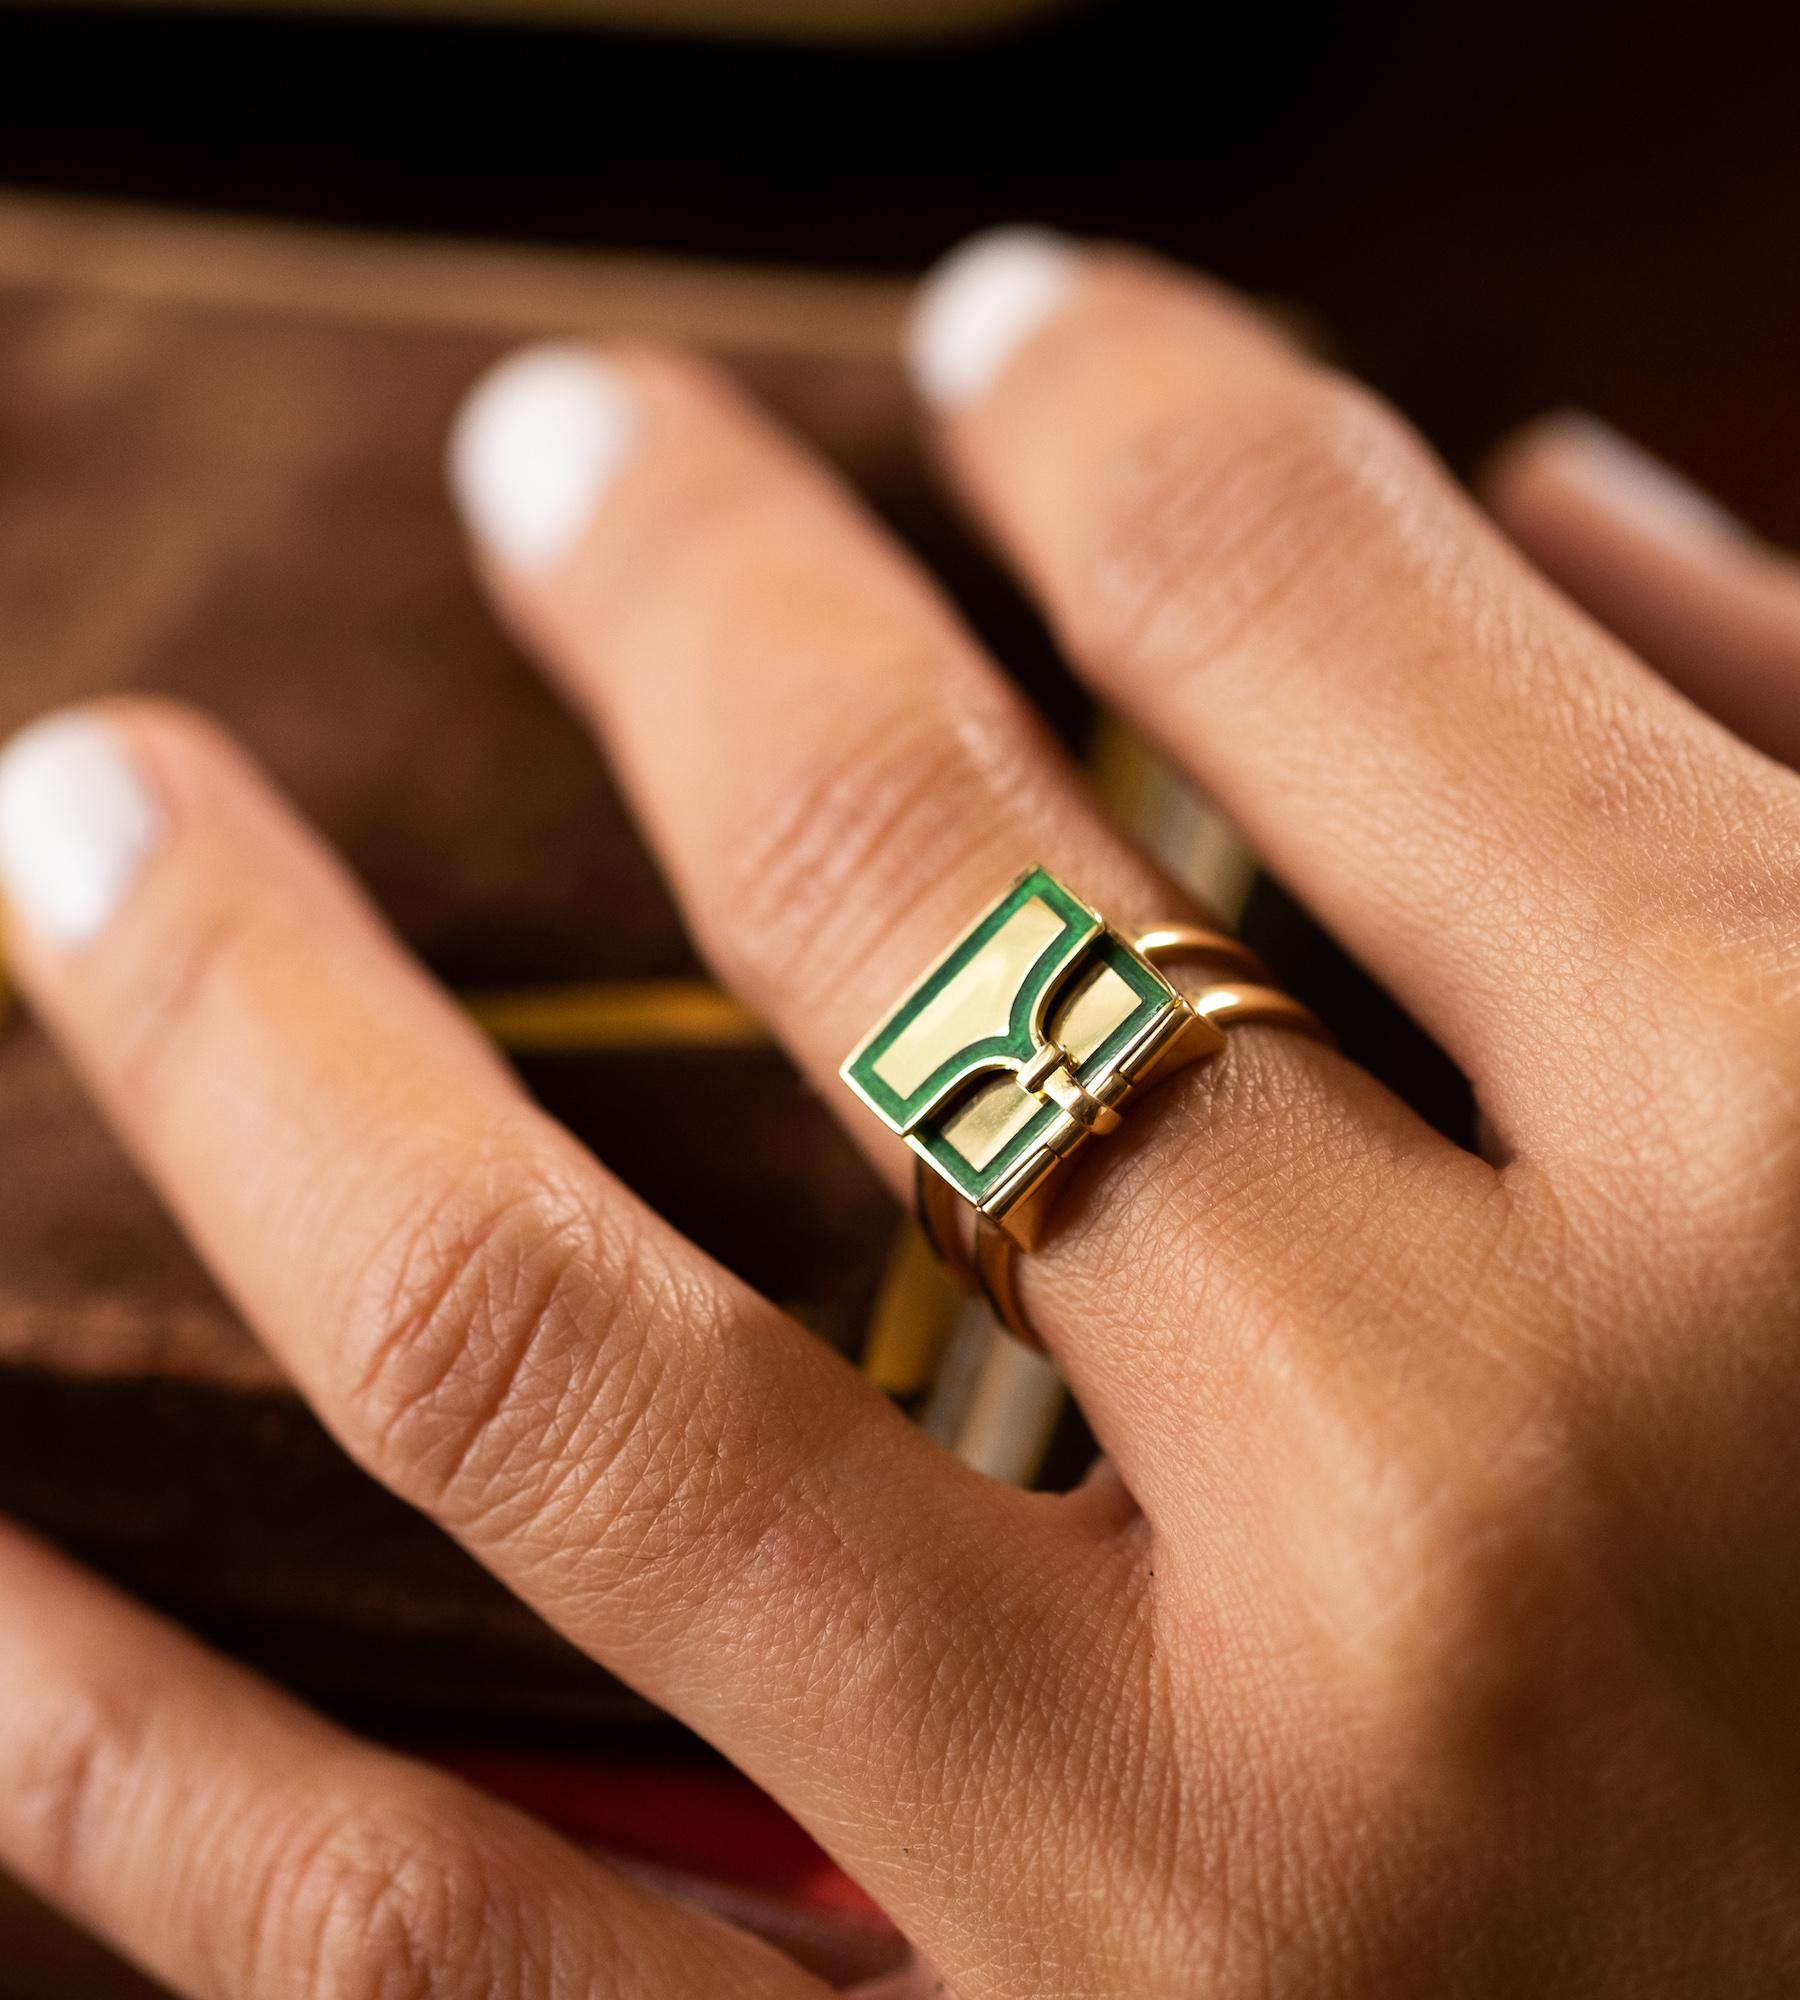 The Fleur Fairfax Book Ring in 18ct Gold and Enamel - Serpentine Green US 7.5 For Sale 1